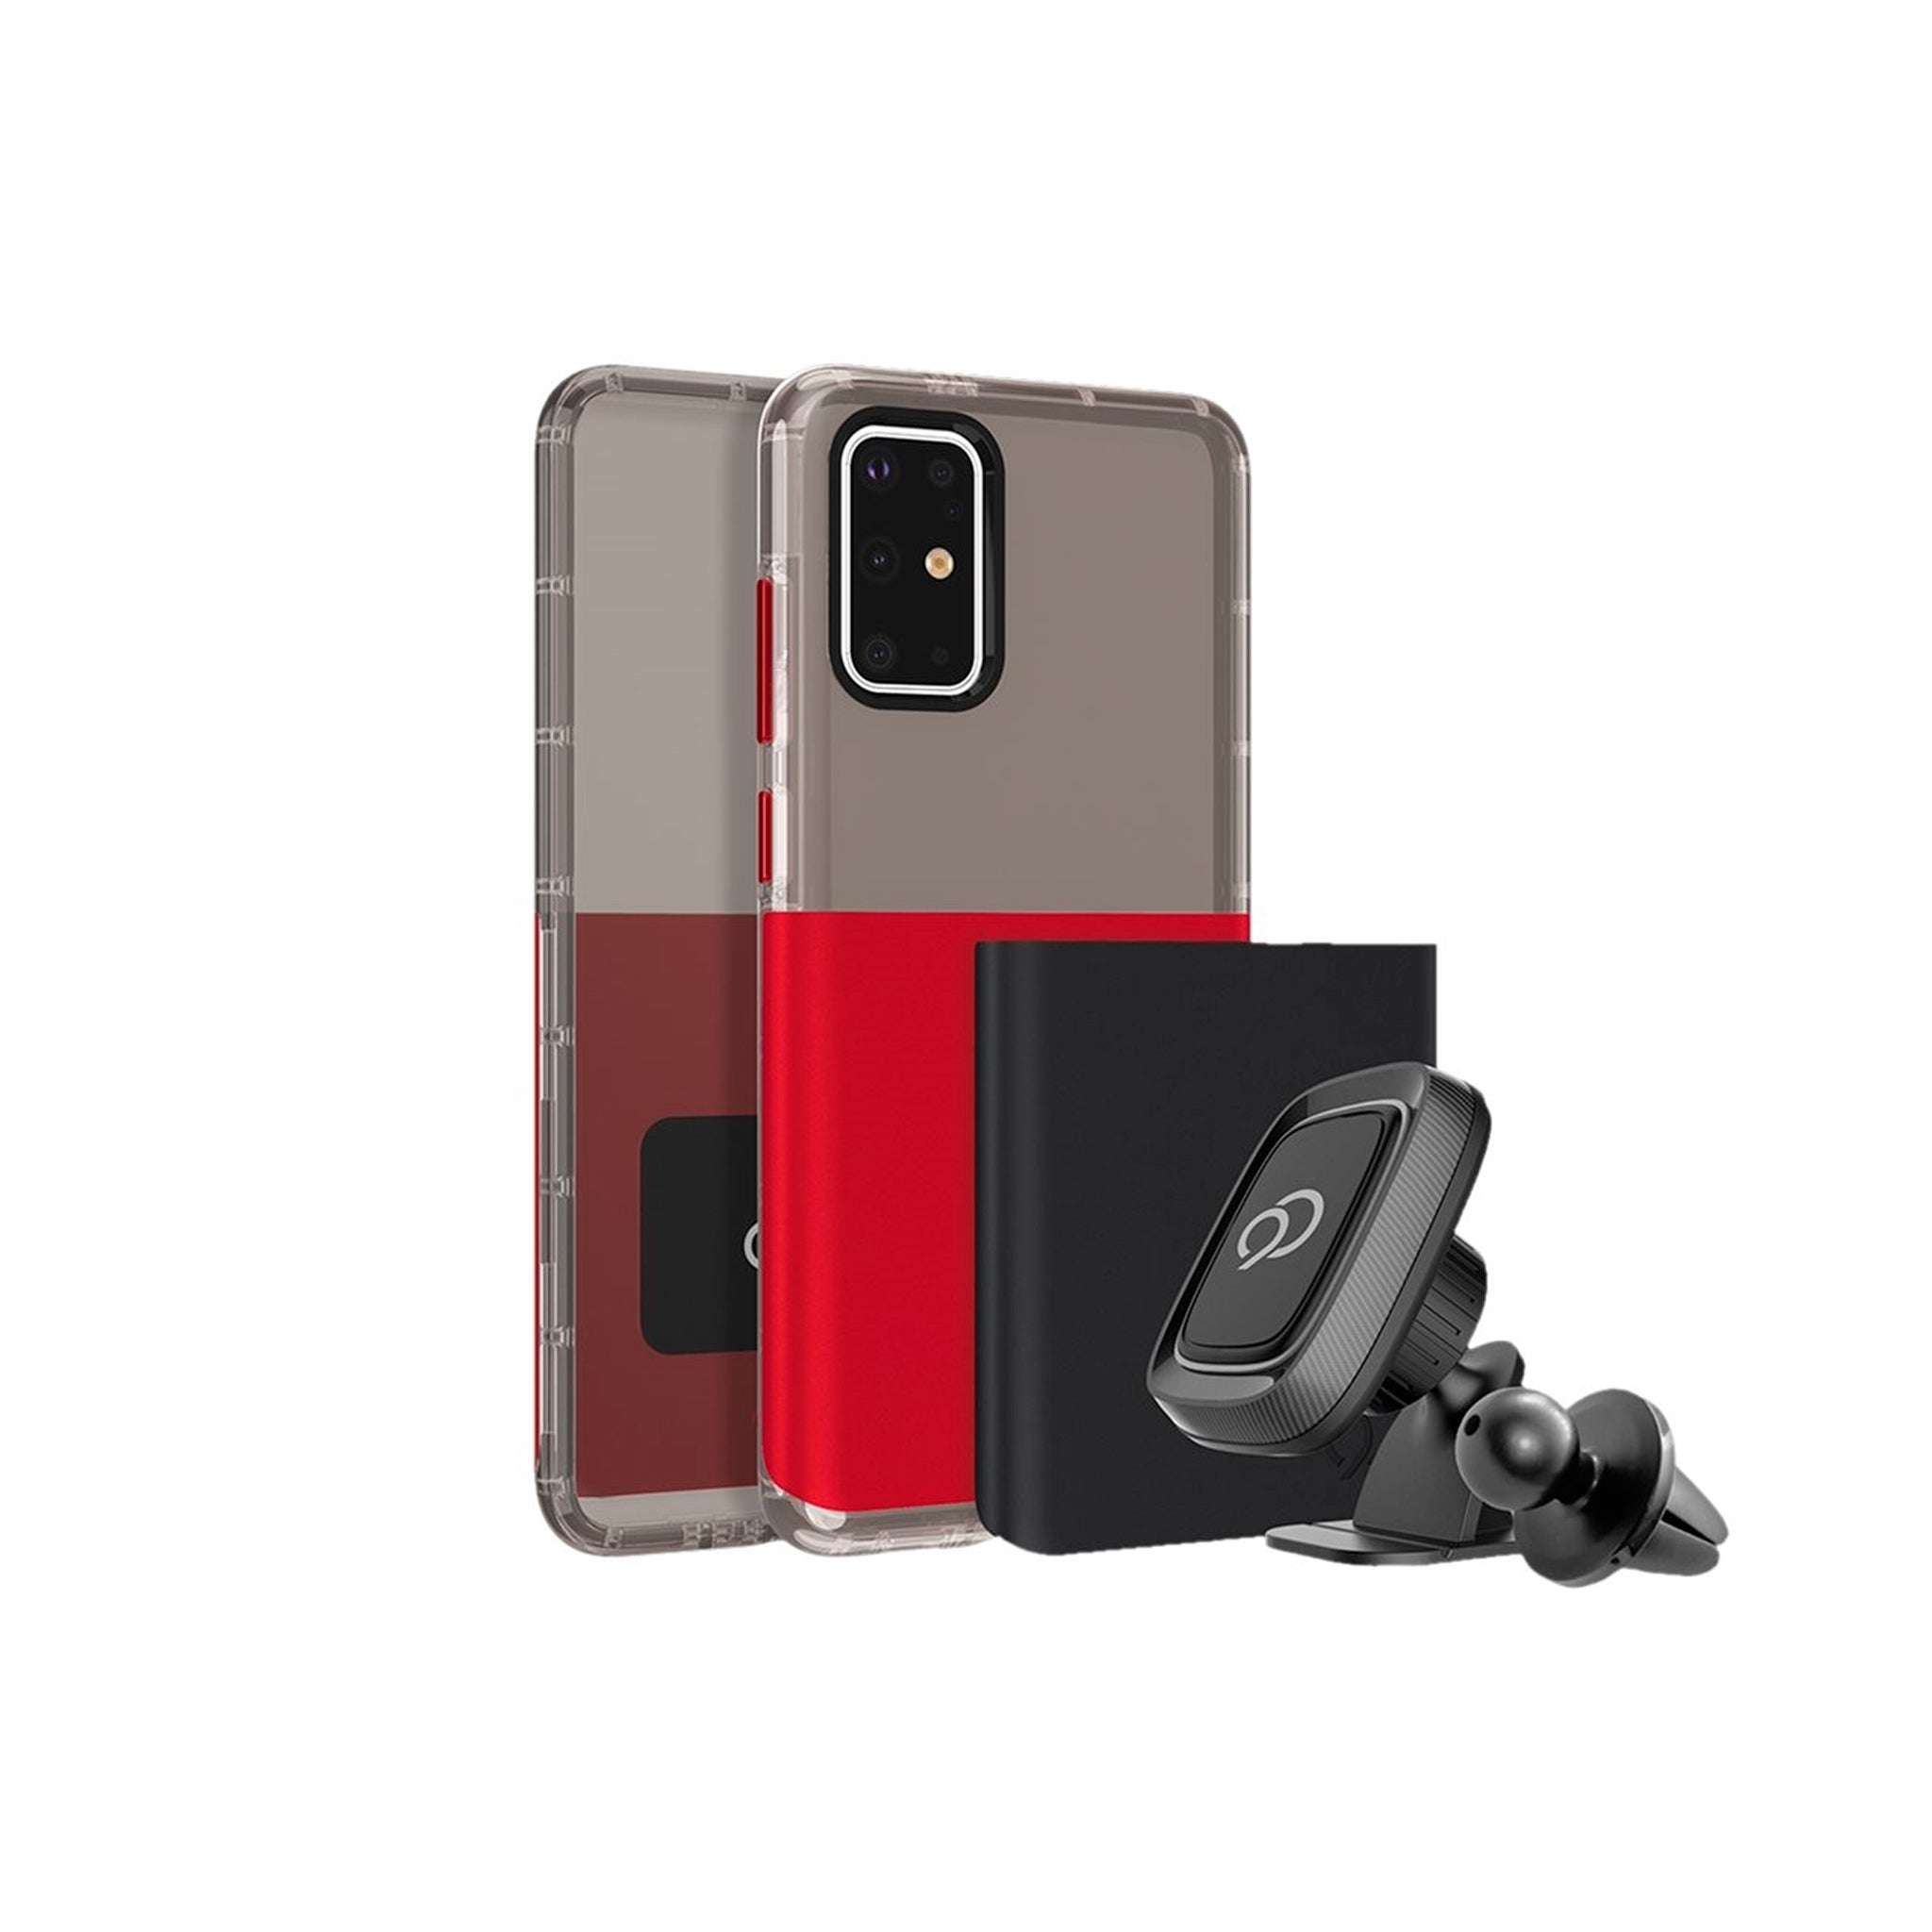 Nimbus9 - Ghost 2 Pro Case For Samsung Galaxy S20 Plus - Pitch Black And Crimson